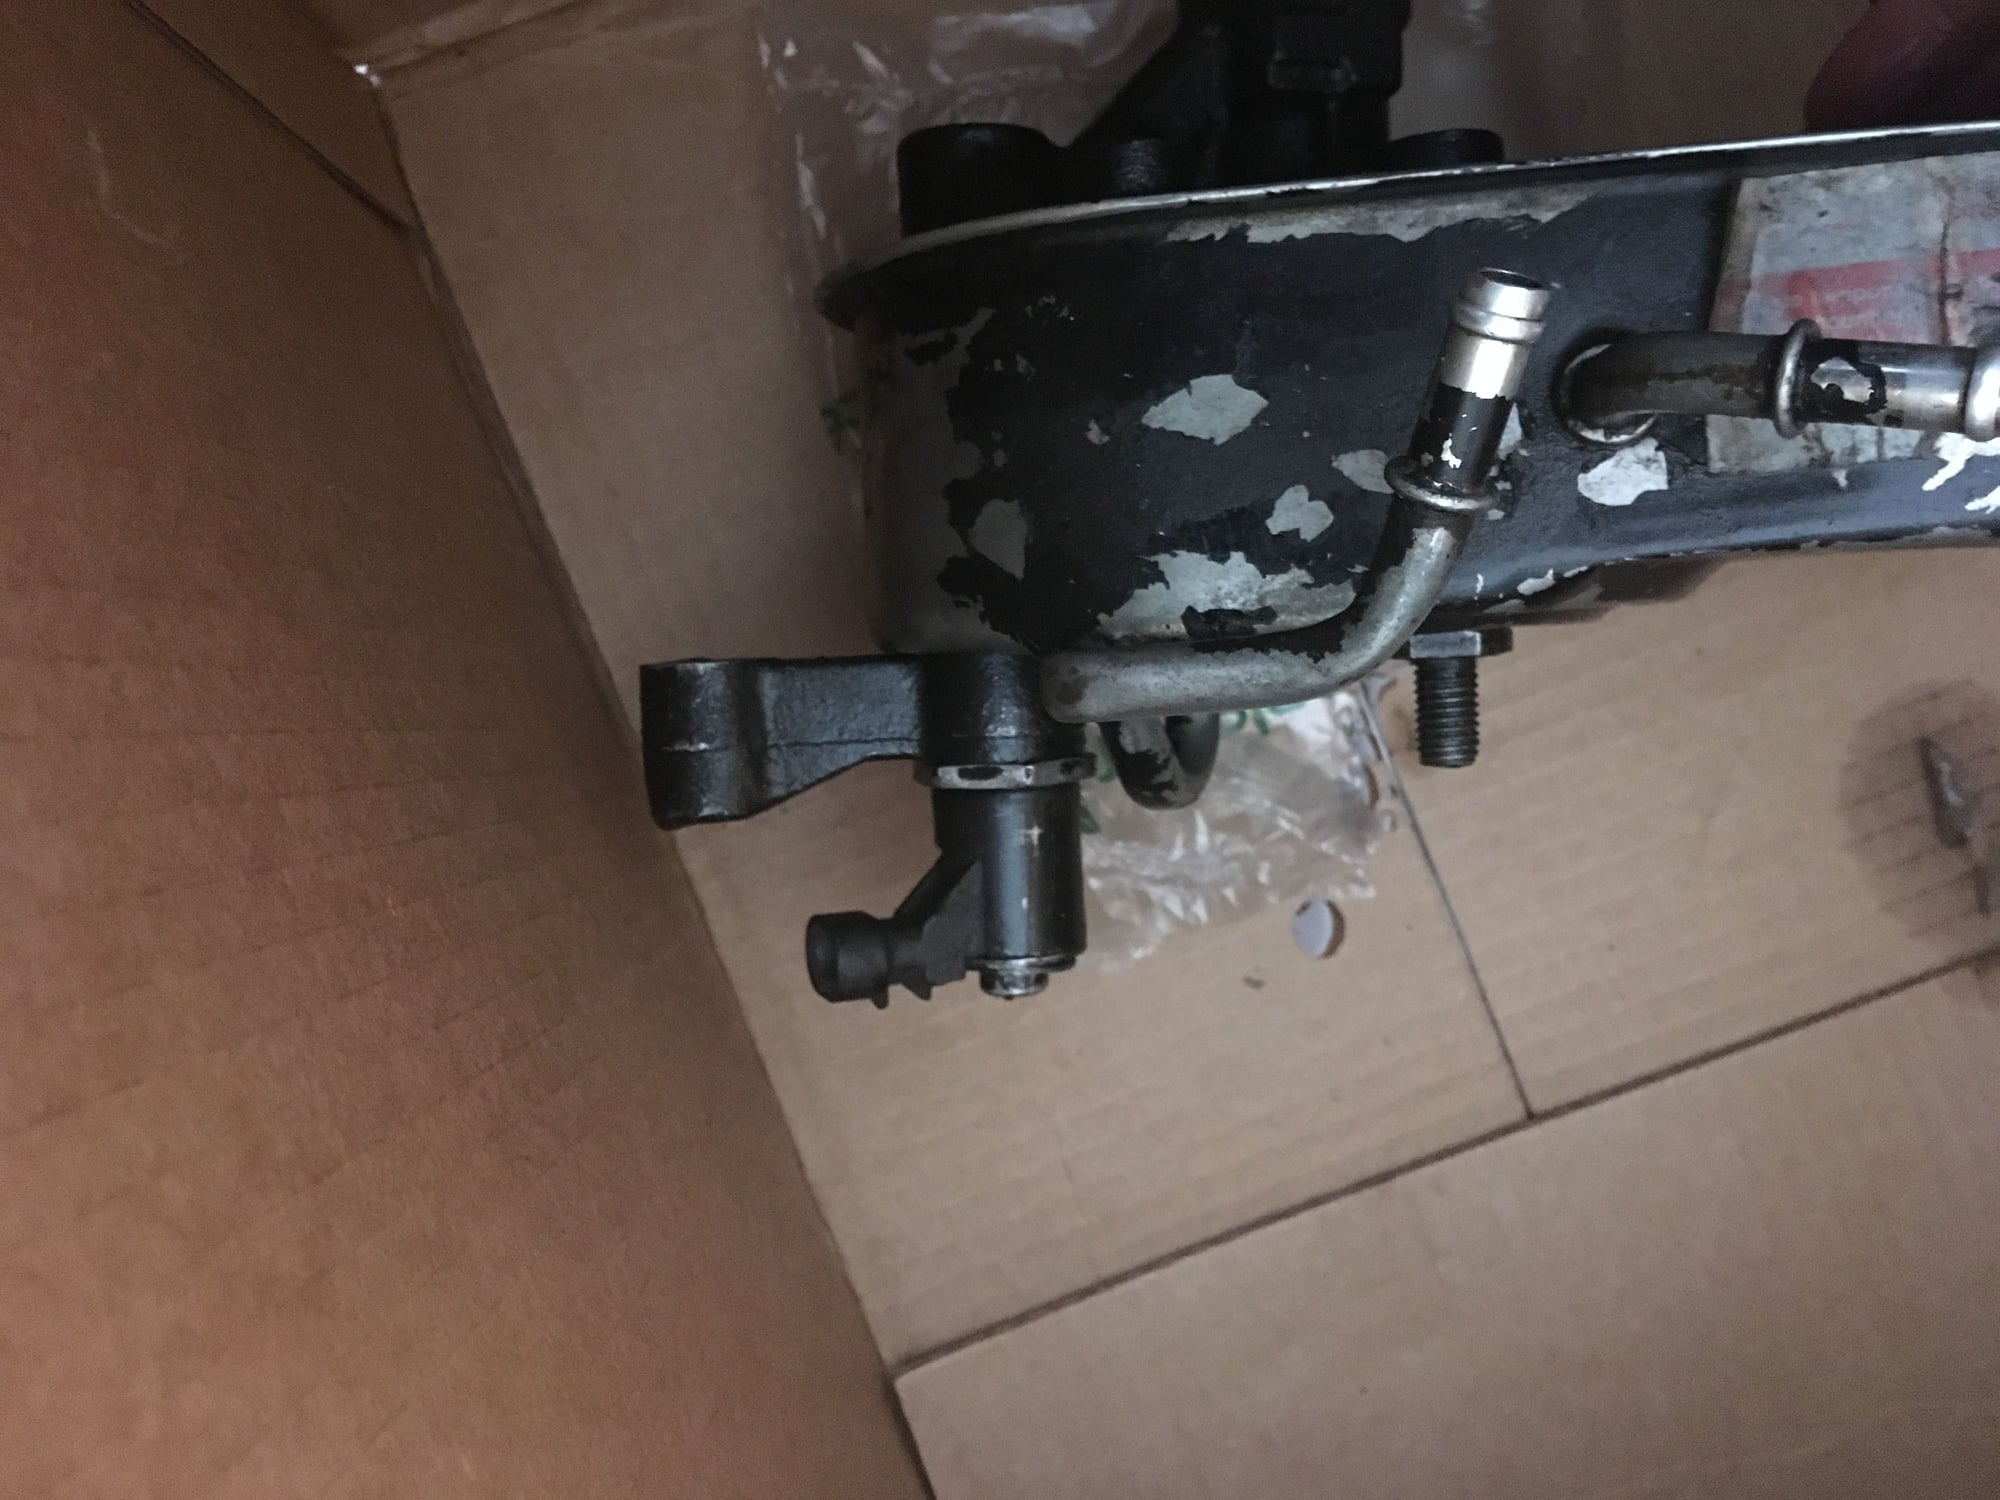 Help identifying part and where to order - Chevrolet Forum - Chevy